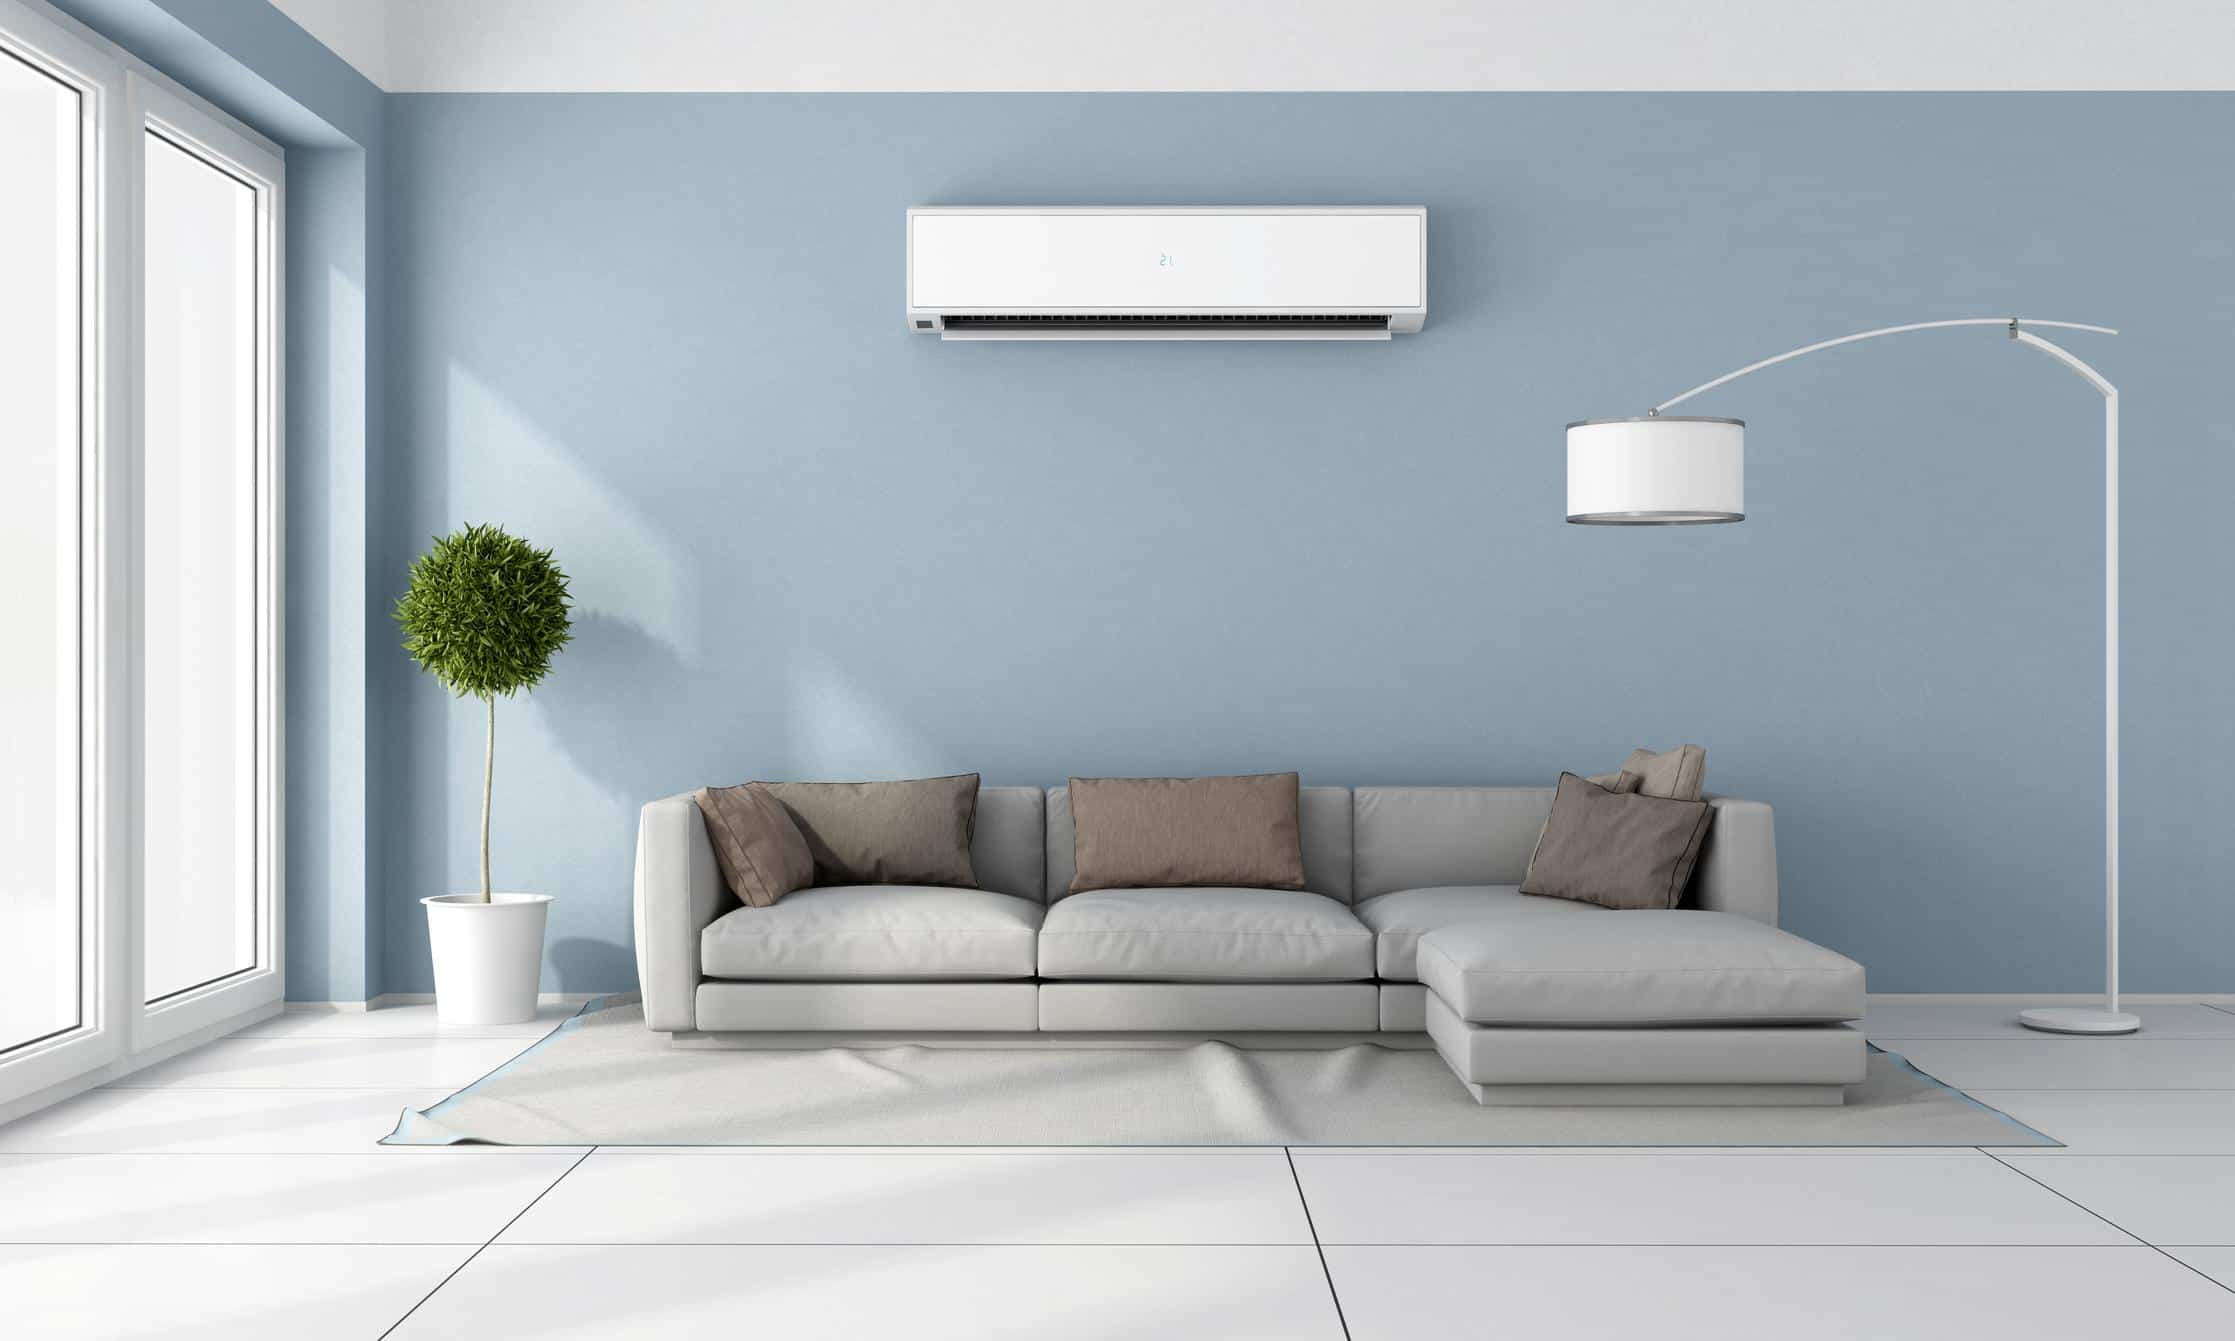 Bright living room with a sectional and ductless heat pump on the wall